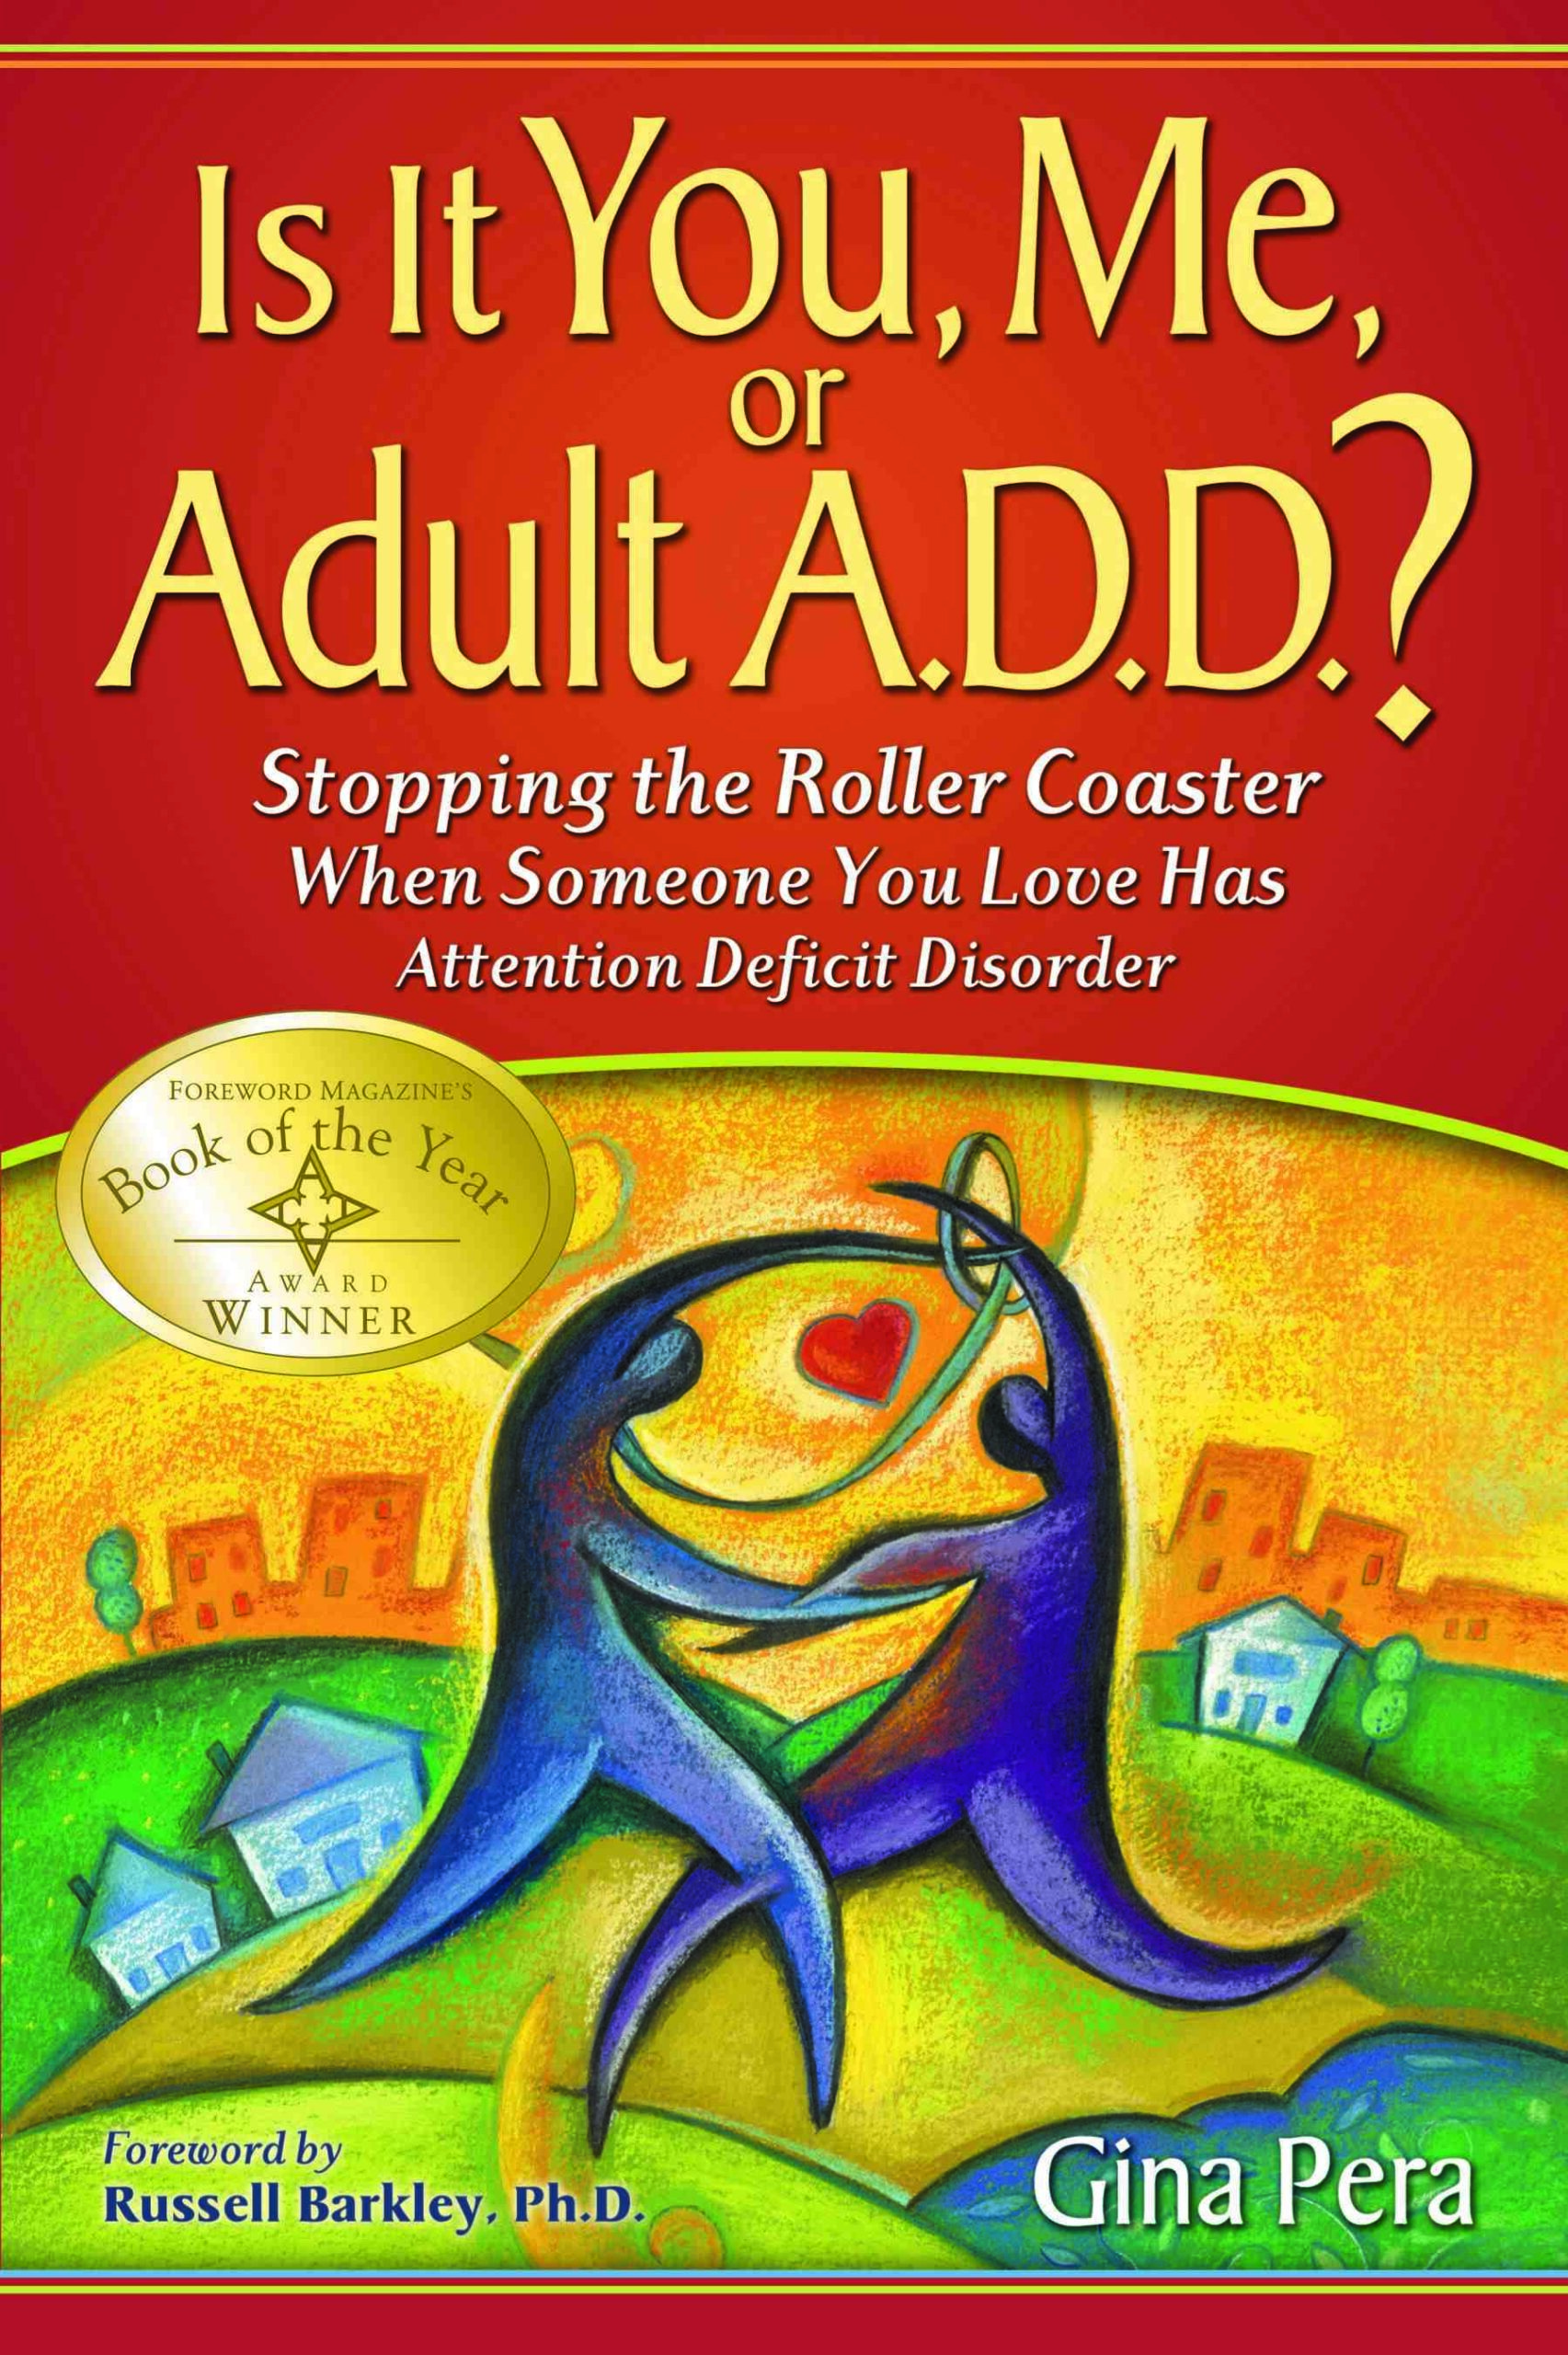 Book review: Is it You, Me, or Adult ADD?